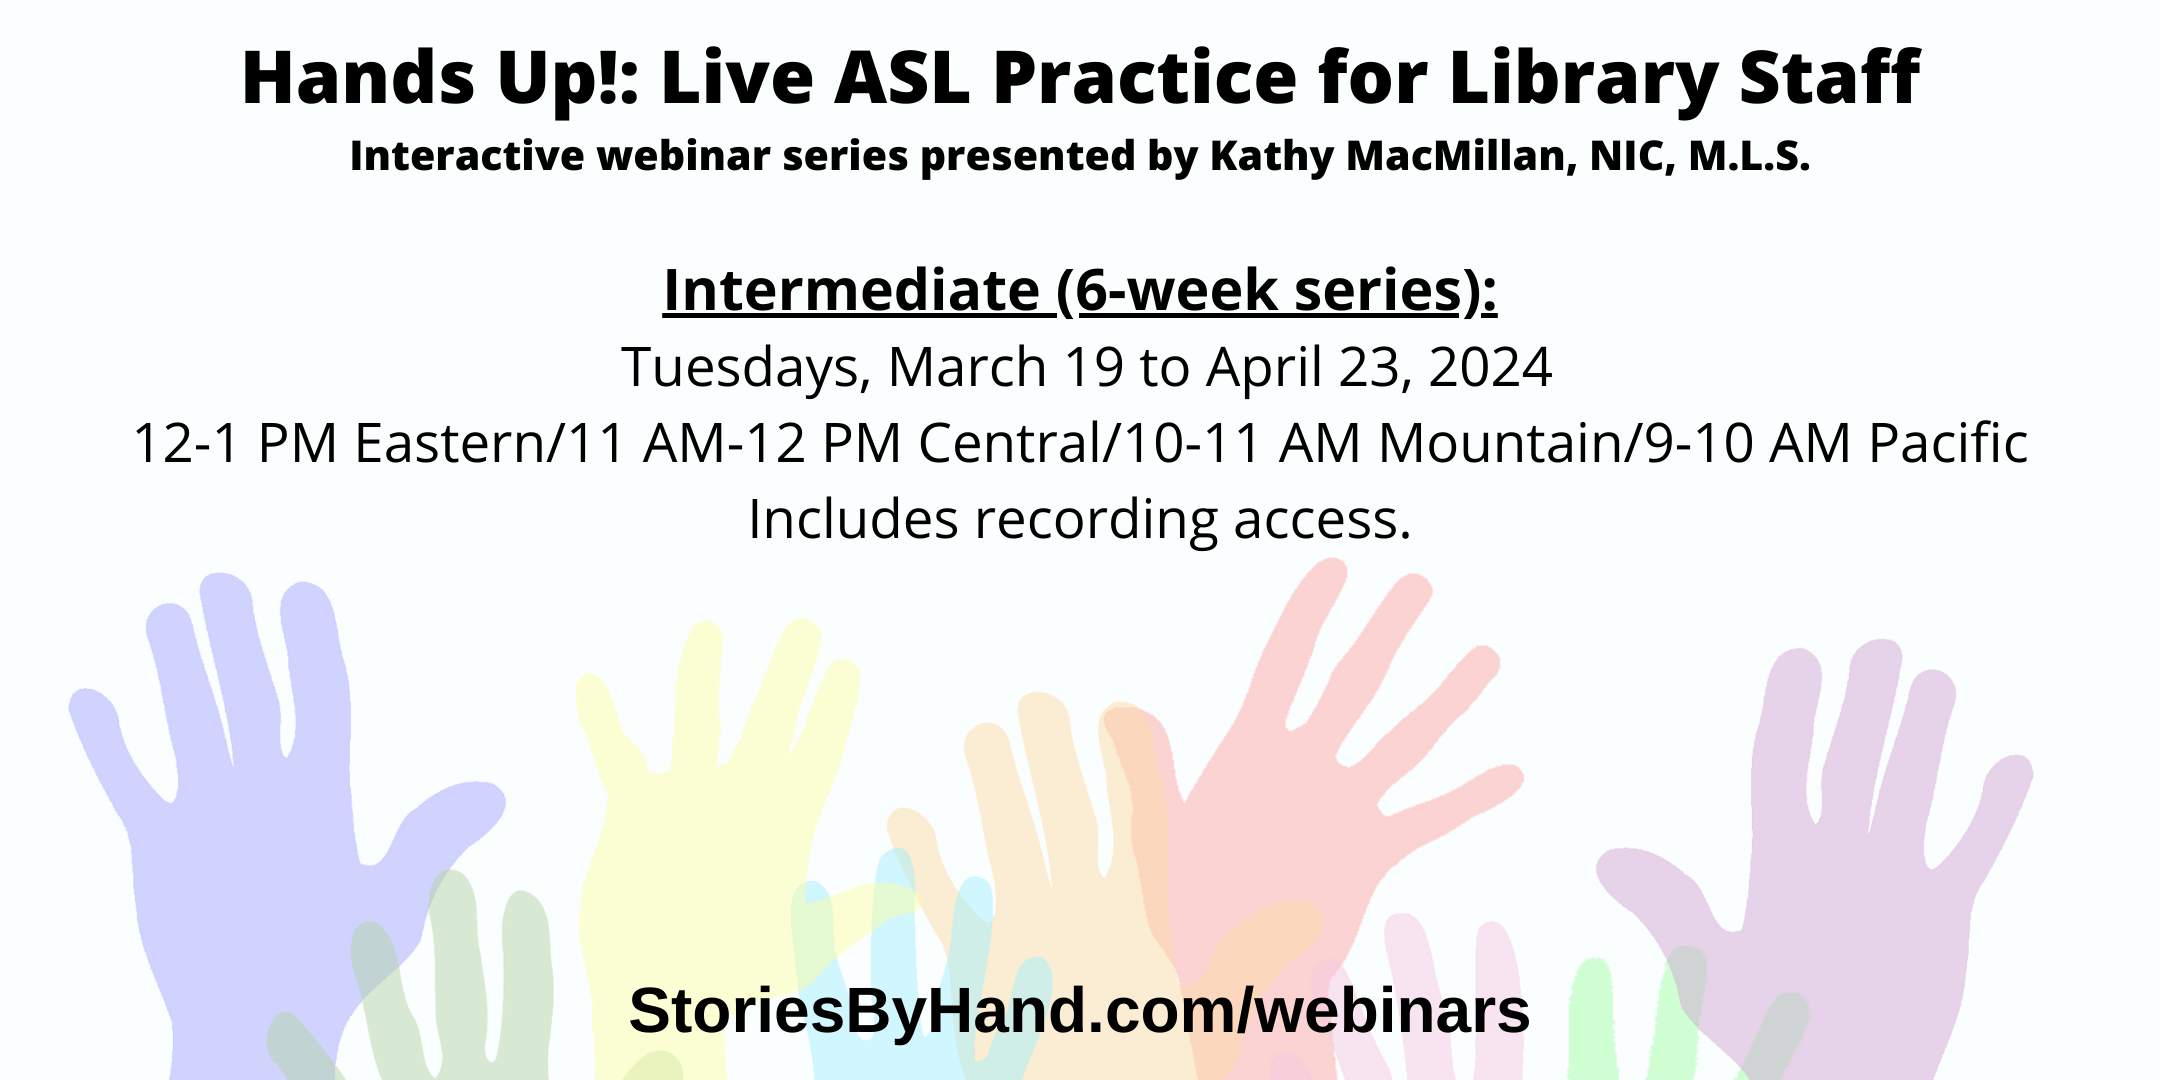 Text appears against a background of colorful hands: Hands Up: Live ASL Practice for Library Staff. Interactive webinar series presented by Kathy MacMillan, NIC, M.L.S. Intermediate (6 week series): Tuesdays, March 19 to April 23, 2024 12-1 PM Eastern/11 AM-12 PM Central/10-11 AM Mountain/9-10 AM Pacific. Includes recording access. StoriesByHand.com/webinars.